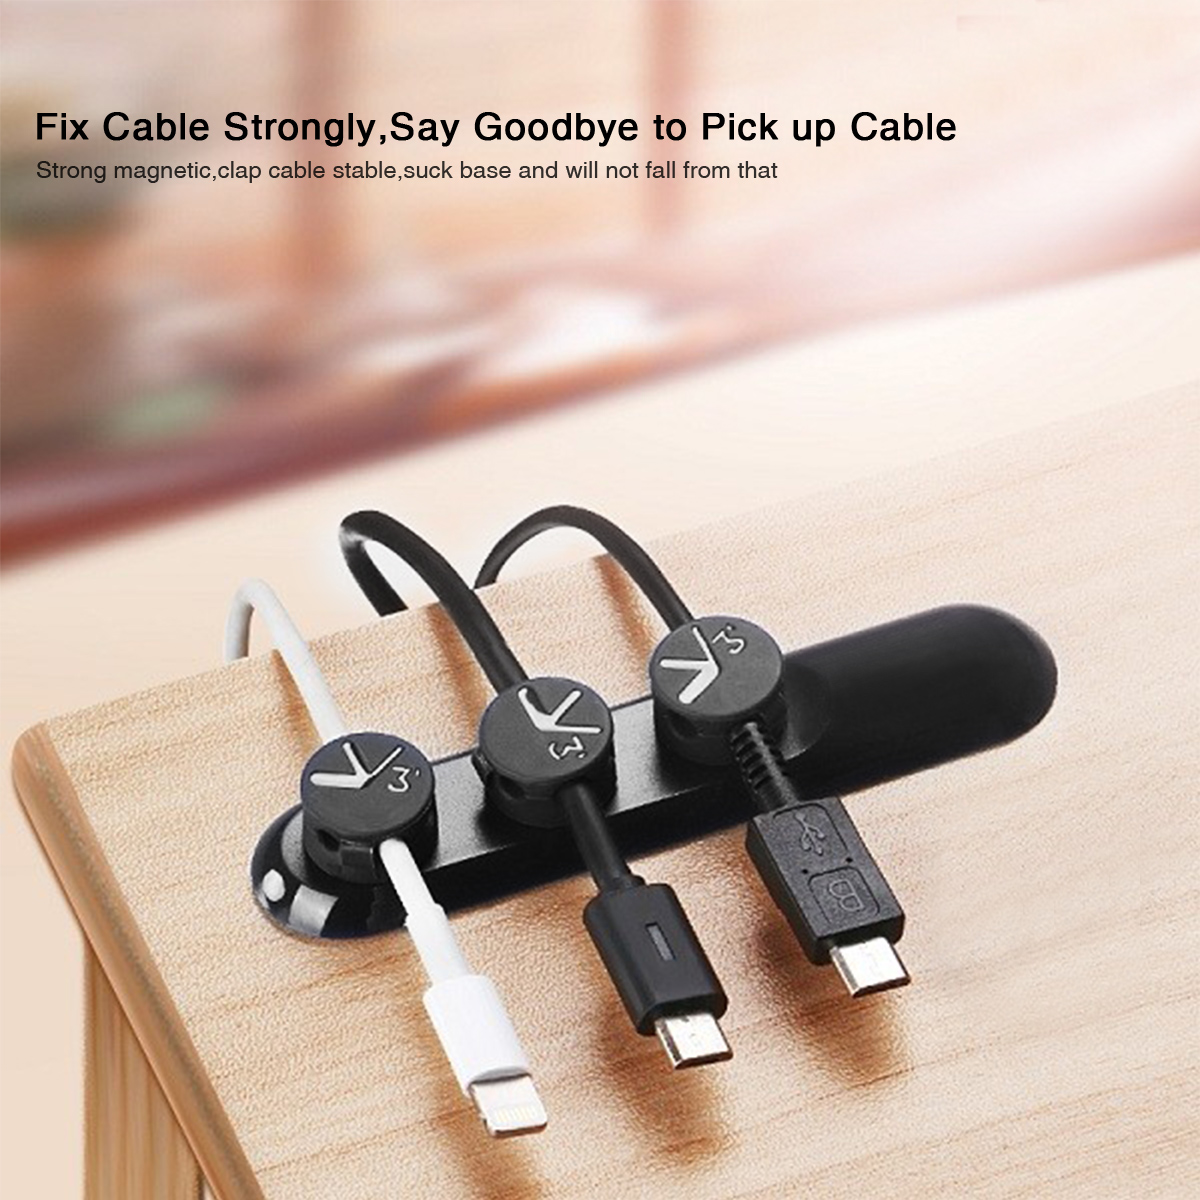 Find [5PCS] Bcase TUP Data Cable Organizer Magnetic Cable Clips Wire Management for Sale on Gipsybee.com with cryptocurrencies